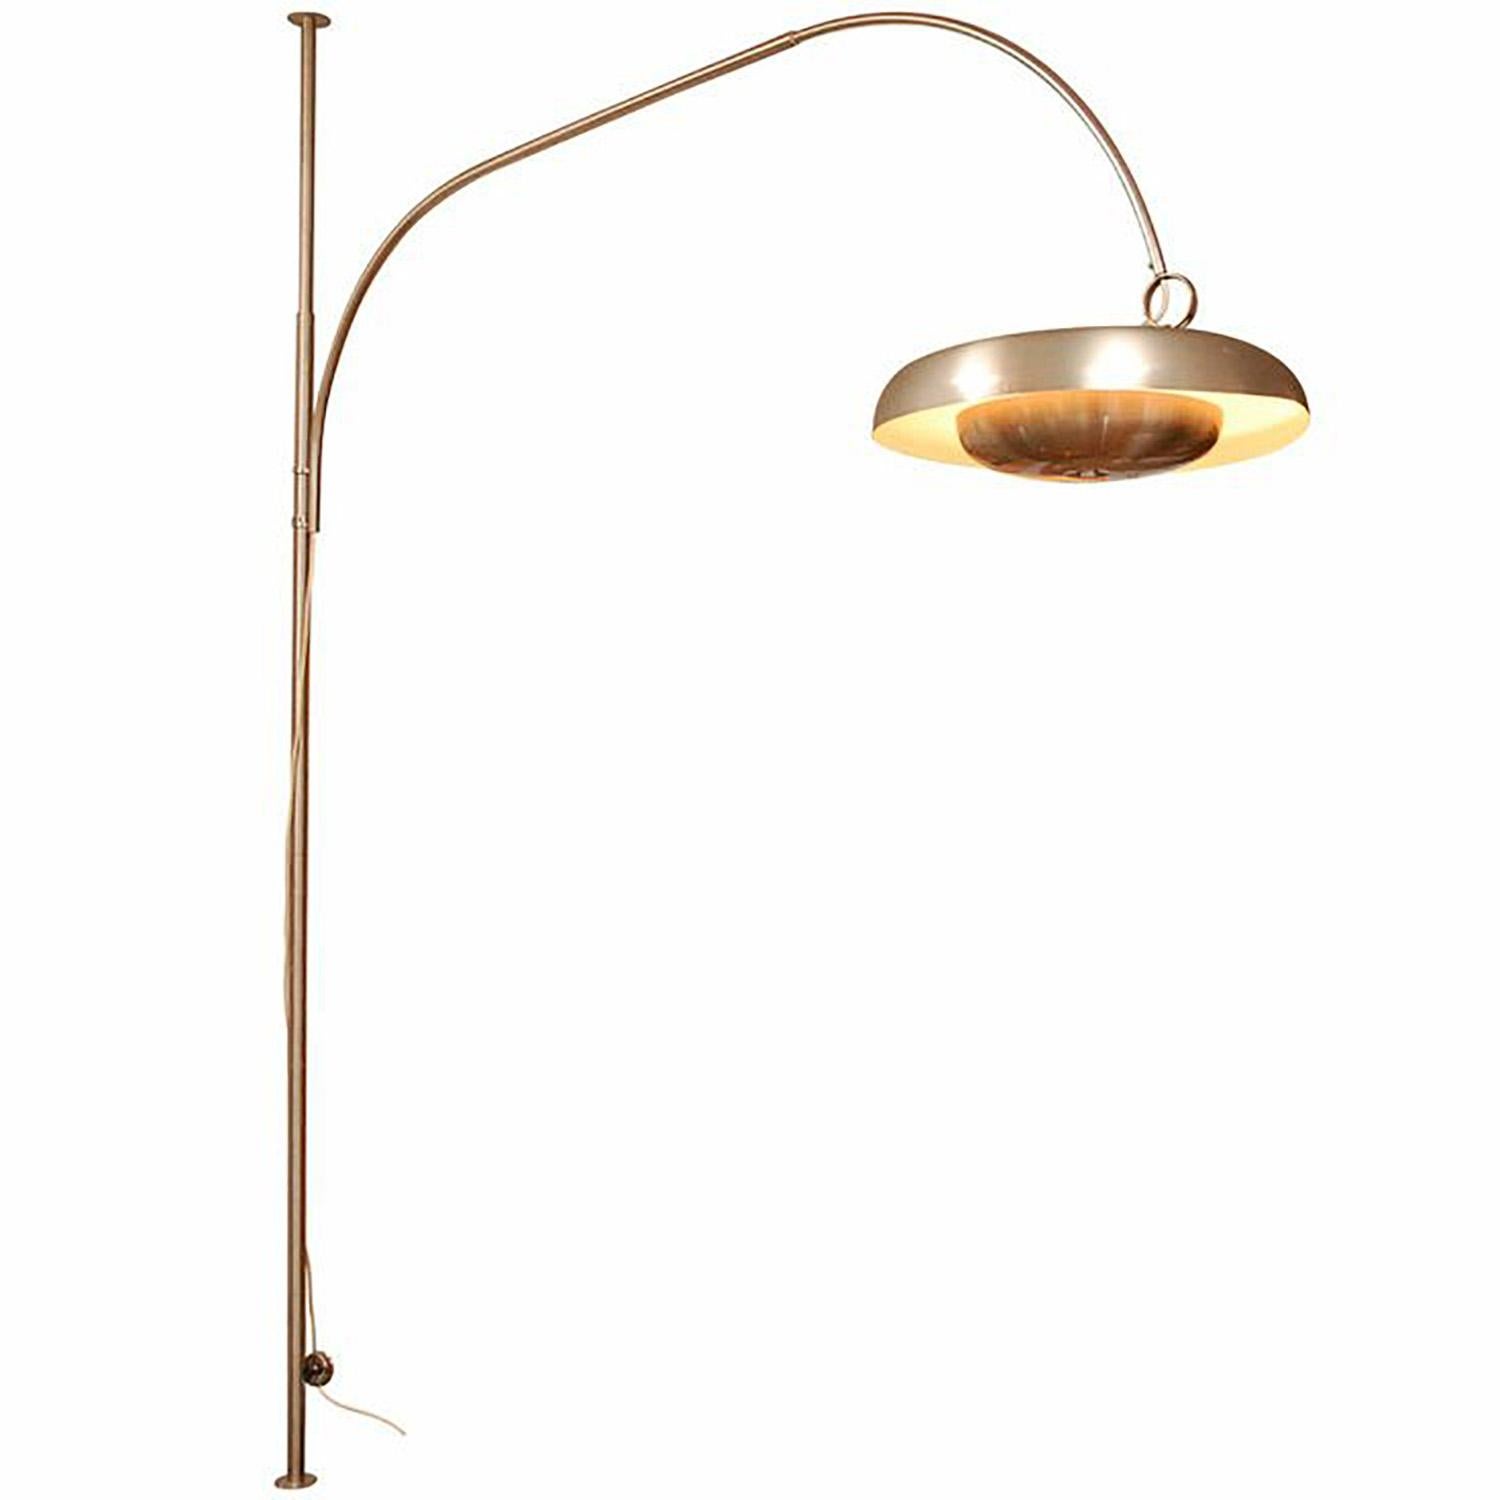 Gorgeous and rare PR arc lamp designed by Pirro Cuniberti for Sirrah Imola, Italy 1970 The tall arm of the piece is made of chrome-plated tubular metal. The height of the pole is adjustable to accommodate different ceiling heights. The bent arm that